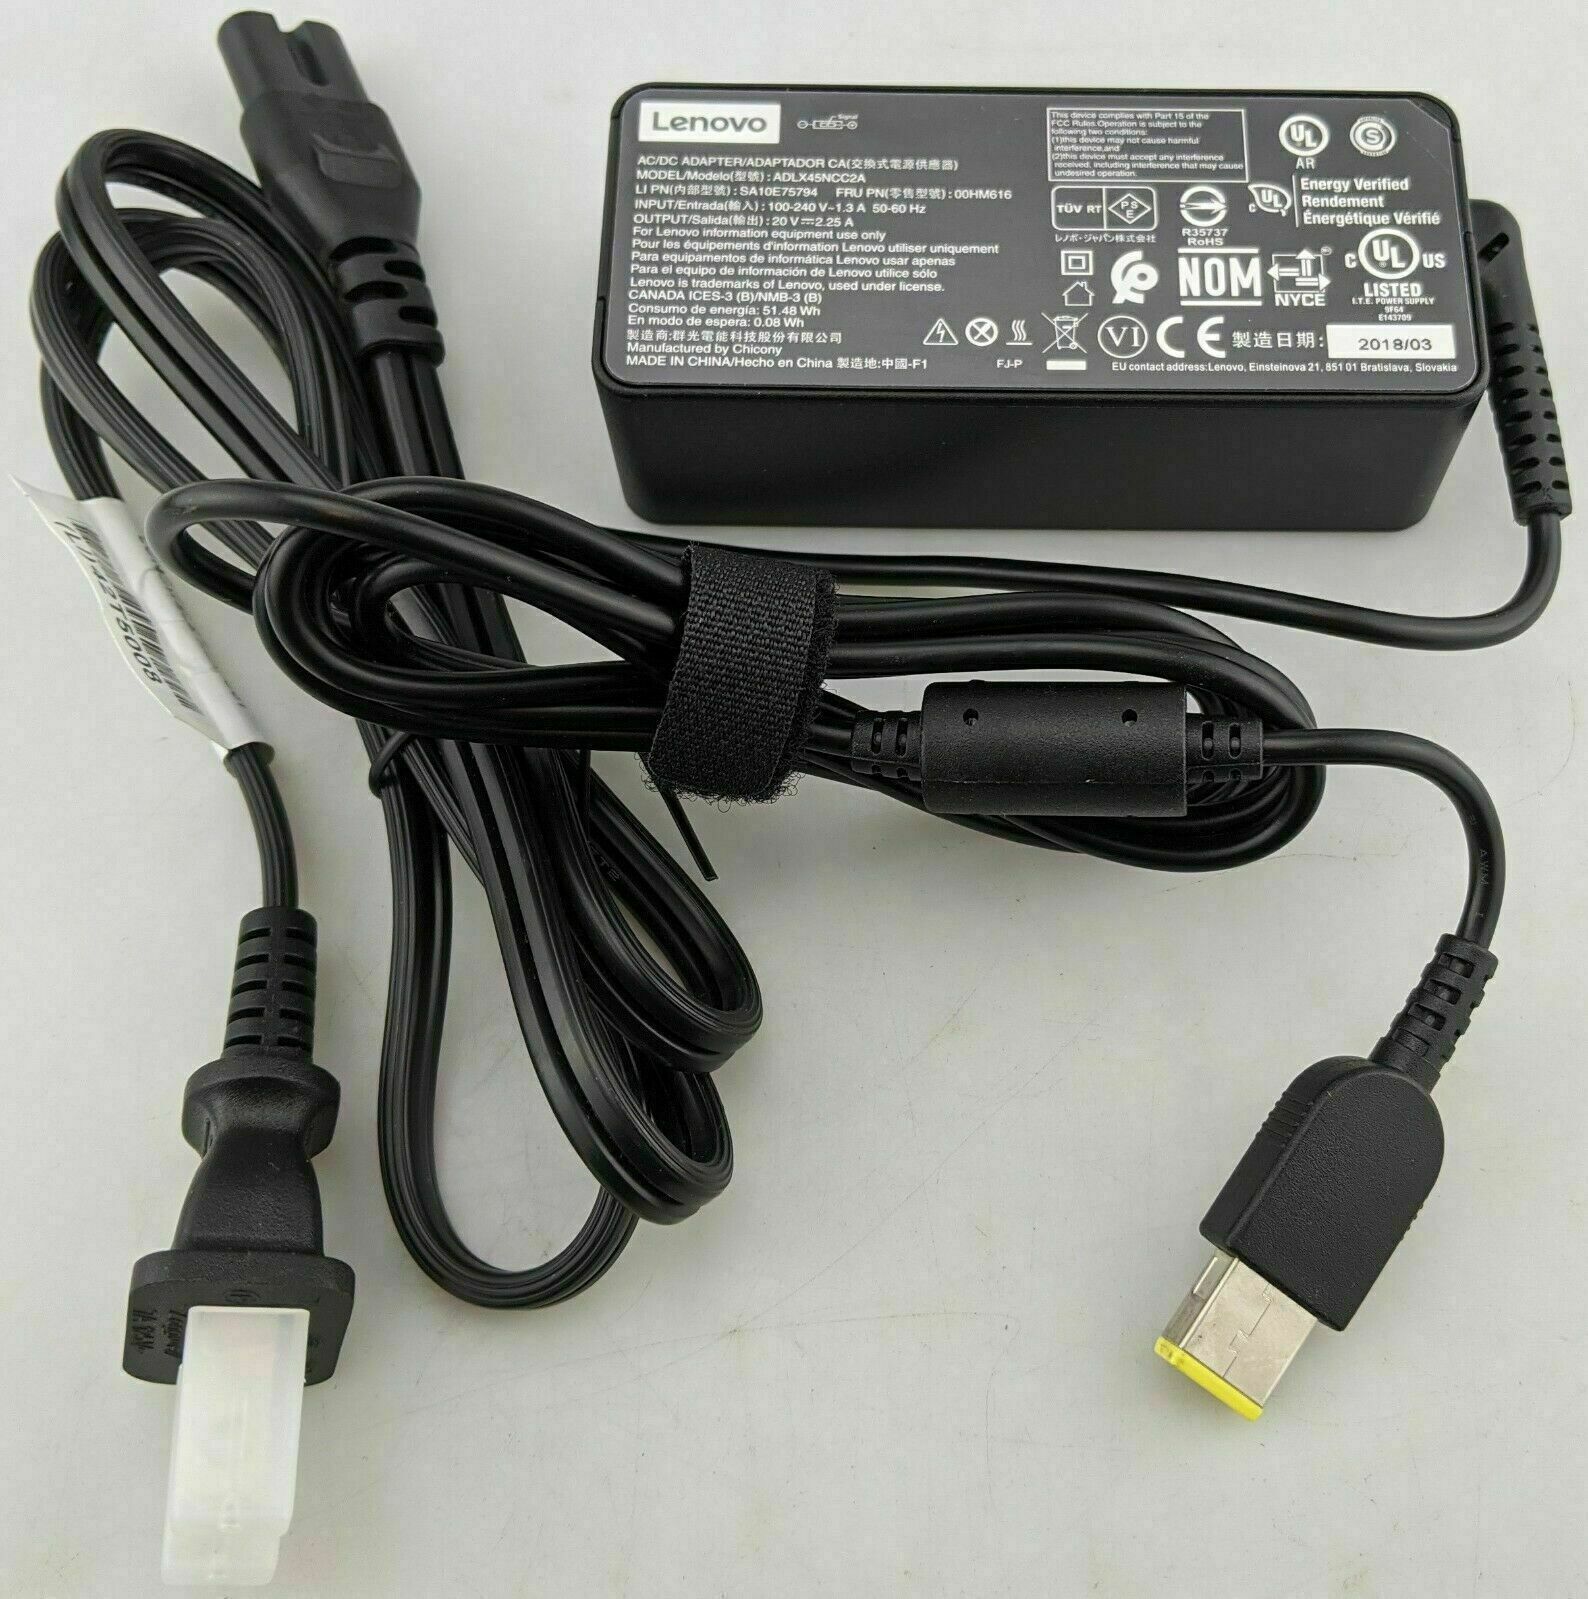 Lot Genuine Lenovo Thinkpad Laptop Charger AC Adapter Power Supply 45W 20V 2.25A